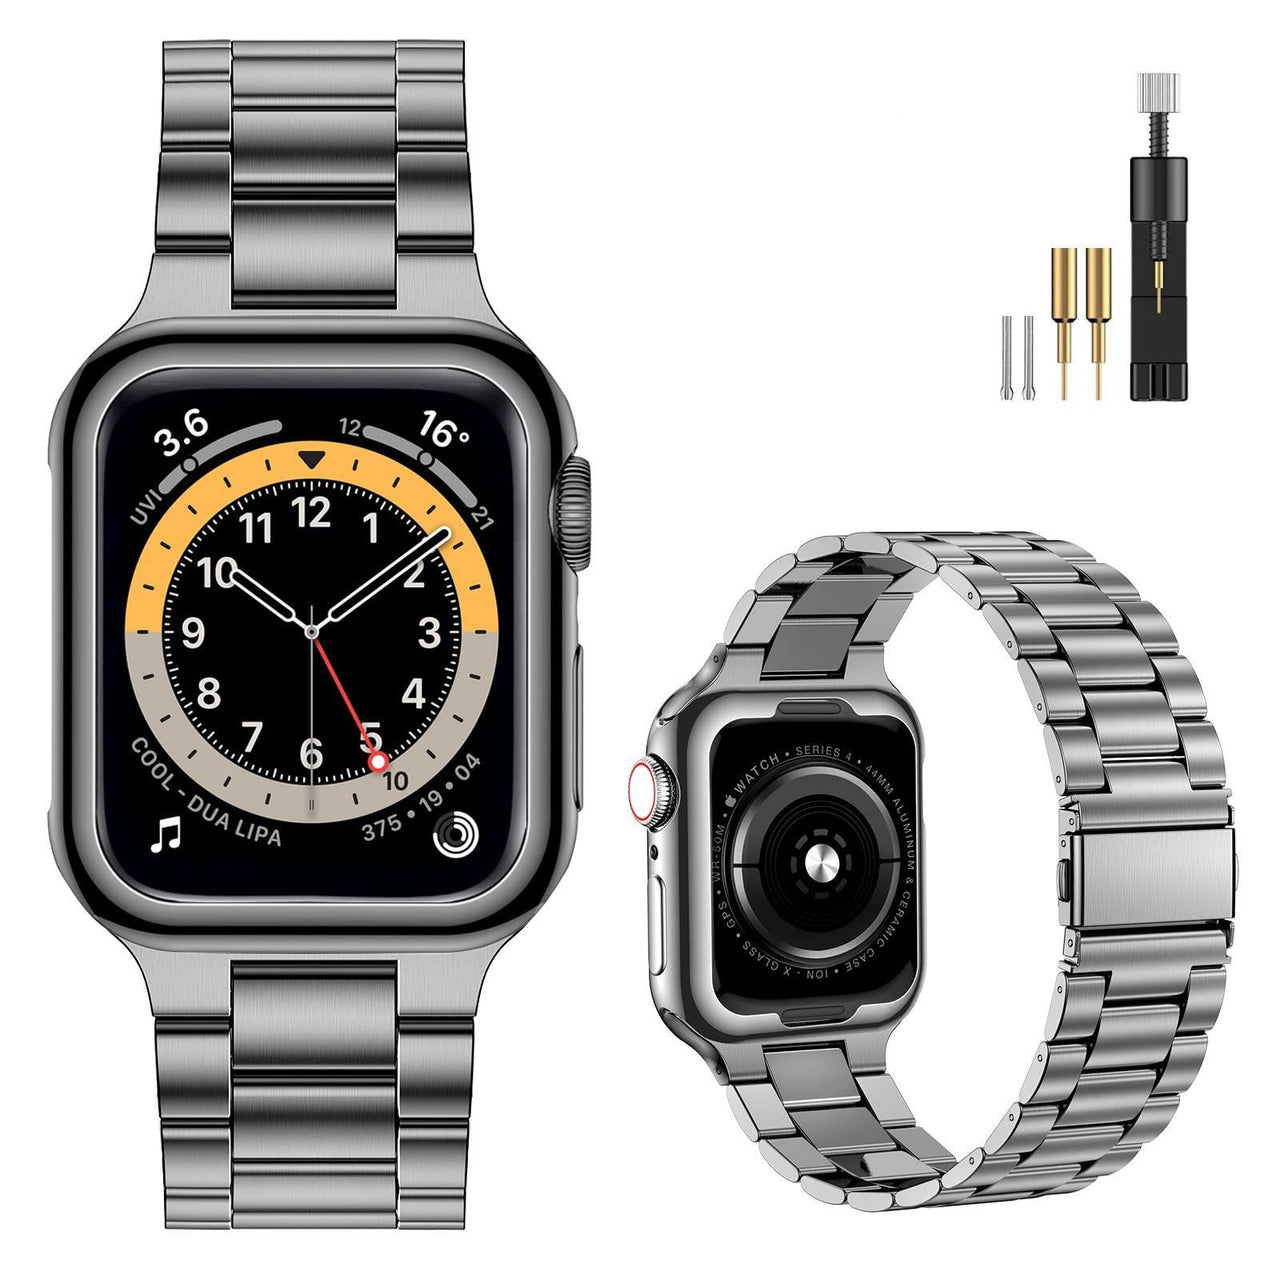 Premium Stainless Steel Strap for Apple Watch - watchband.direct